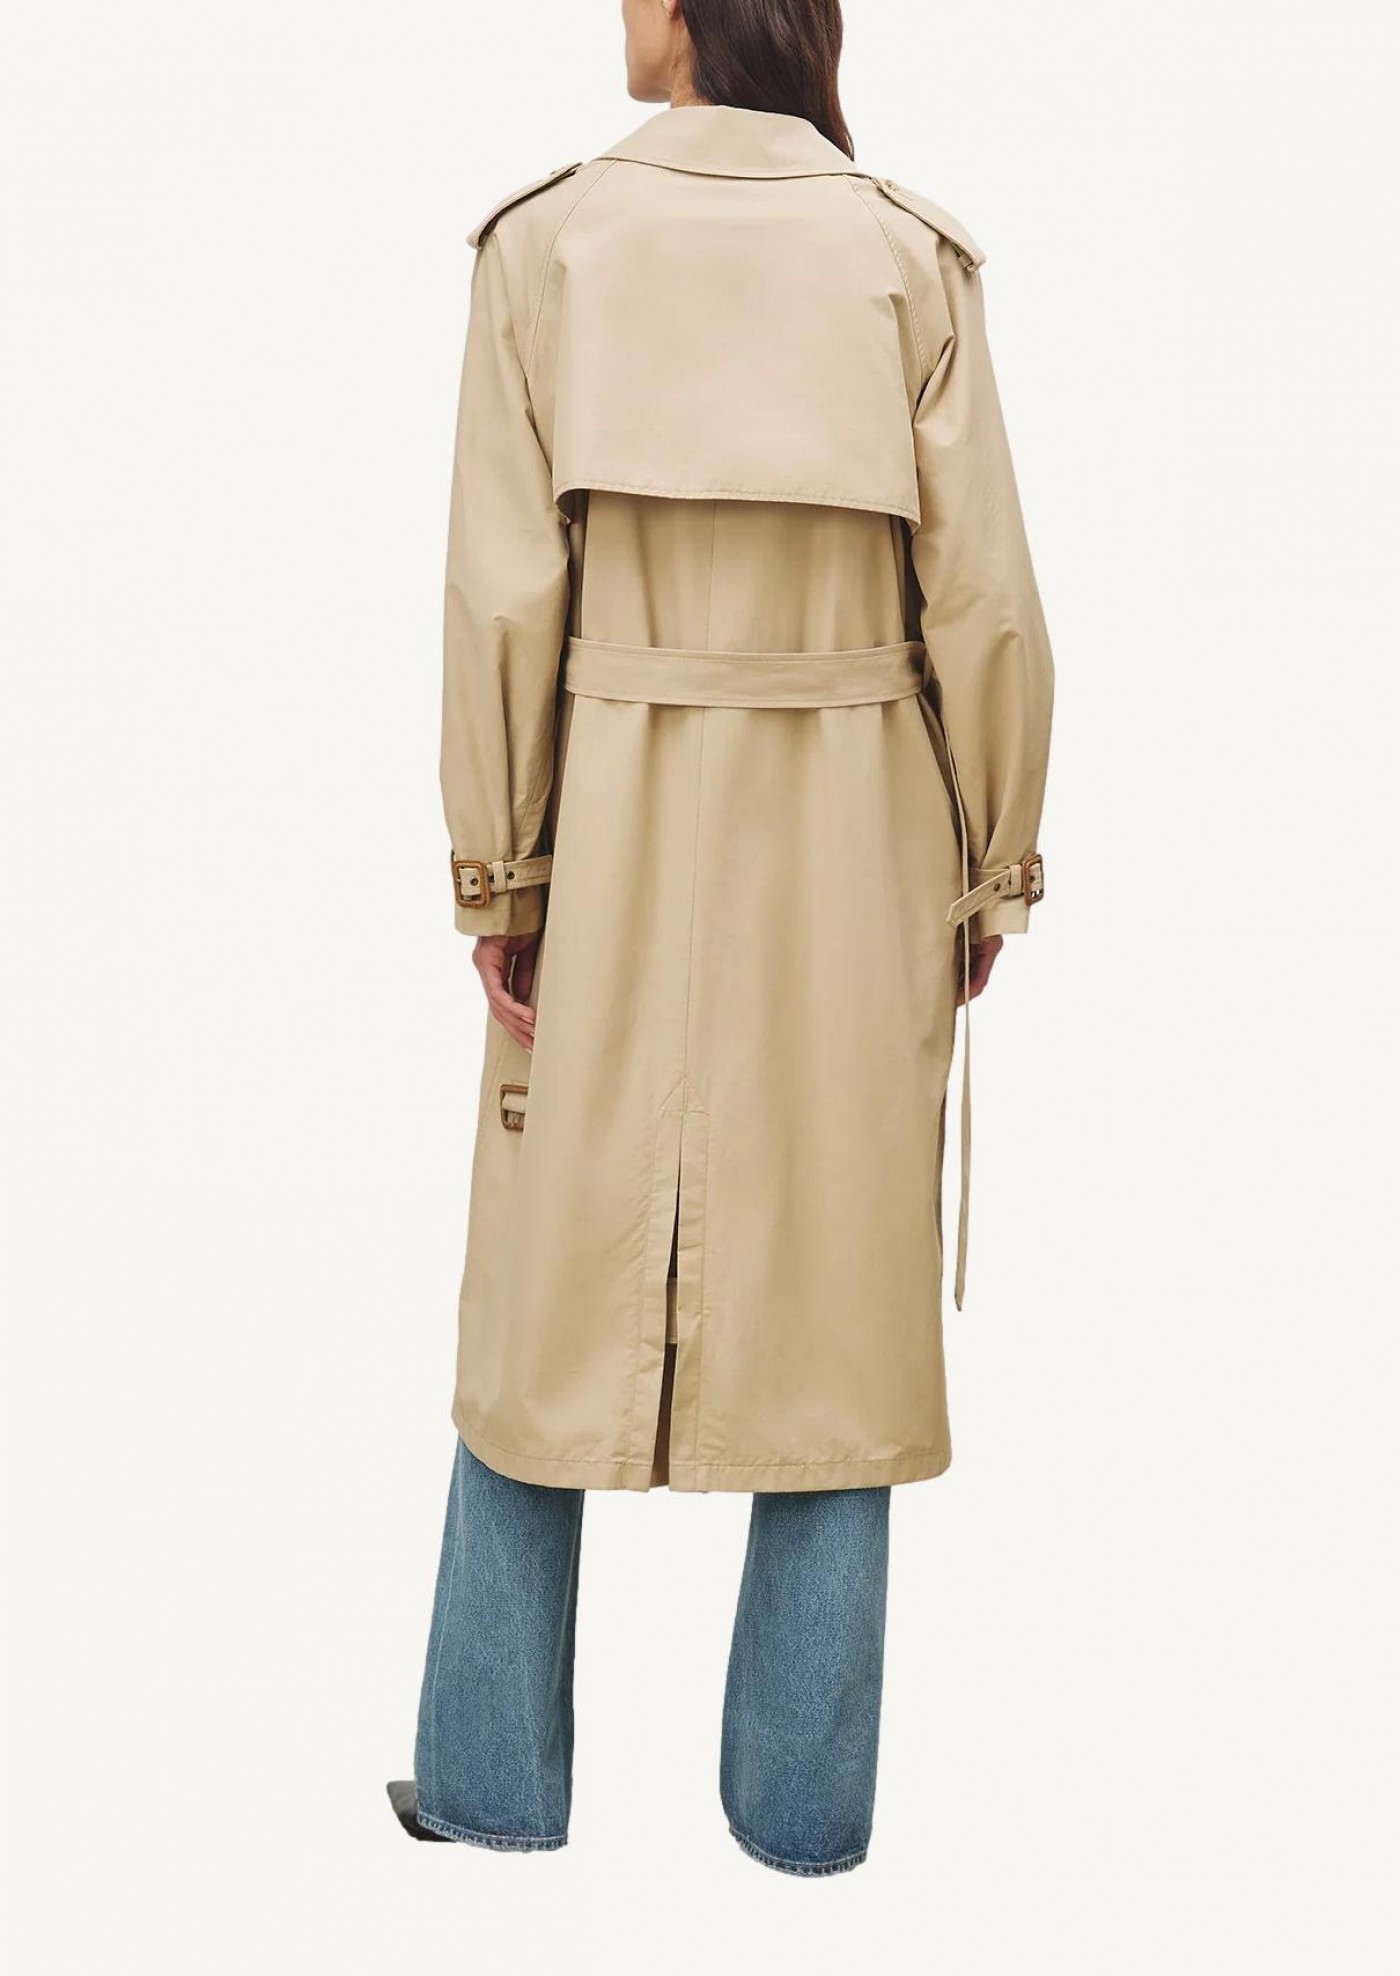 Tanner trench coat